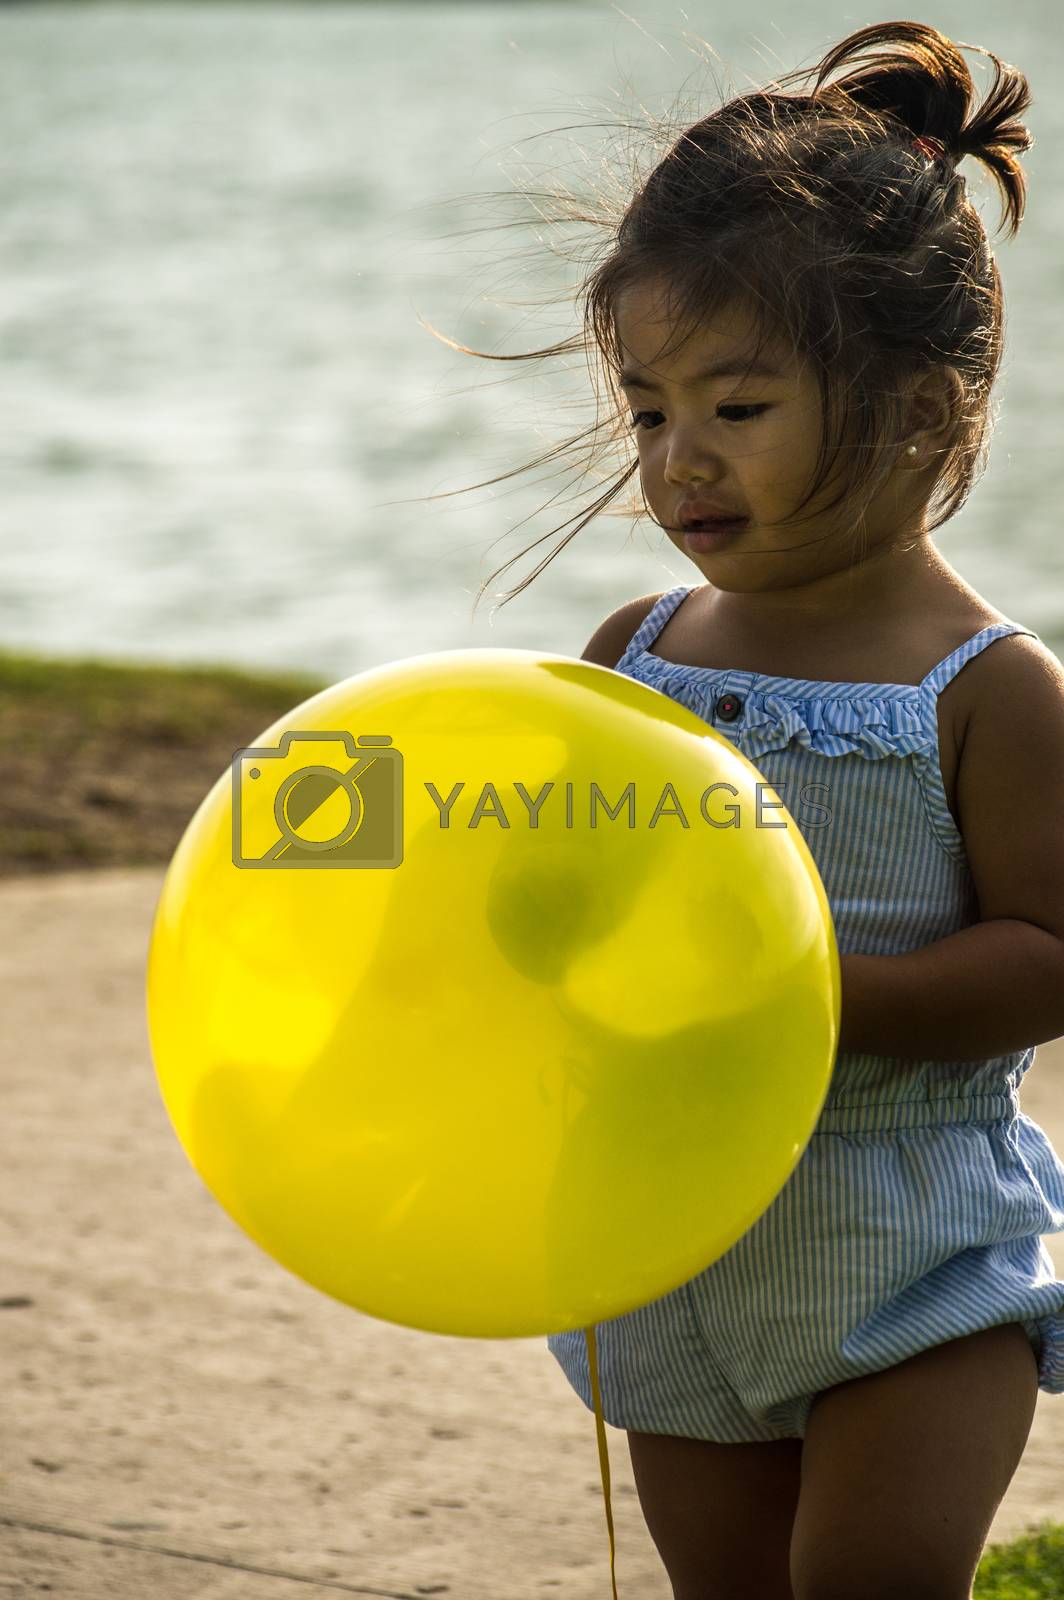 Royalty free image of Little Girl With Balloon by tim_rones